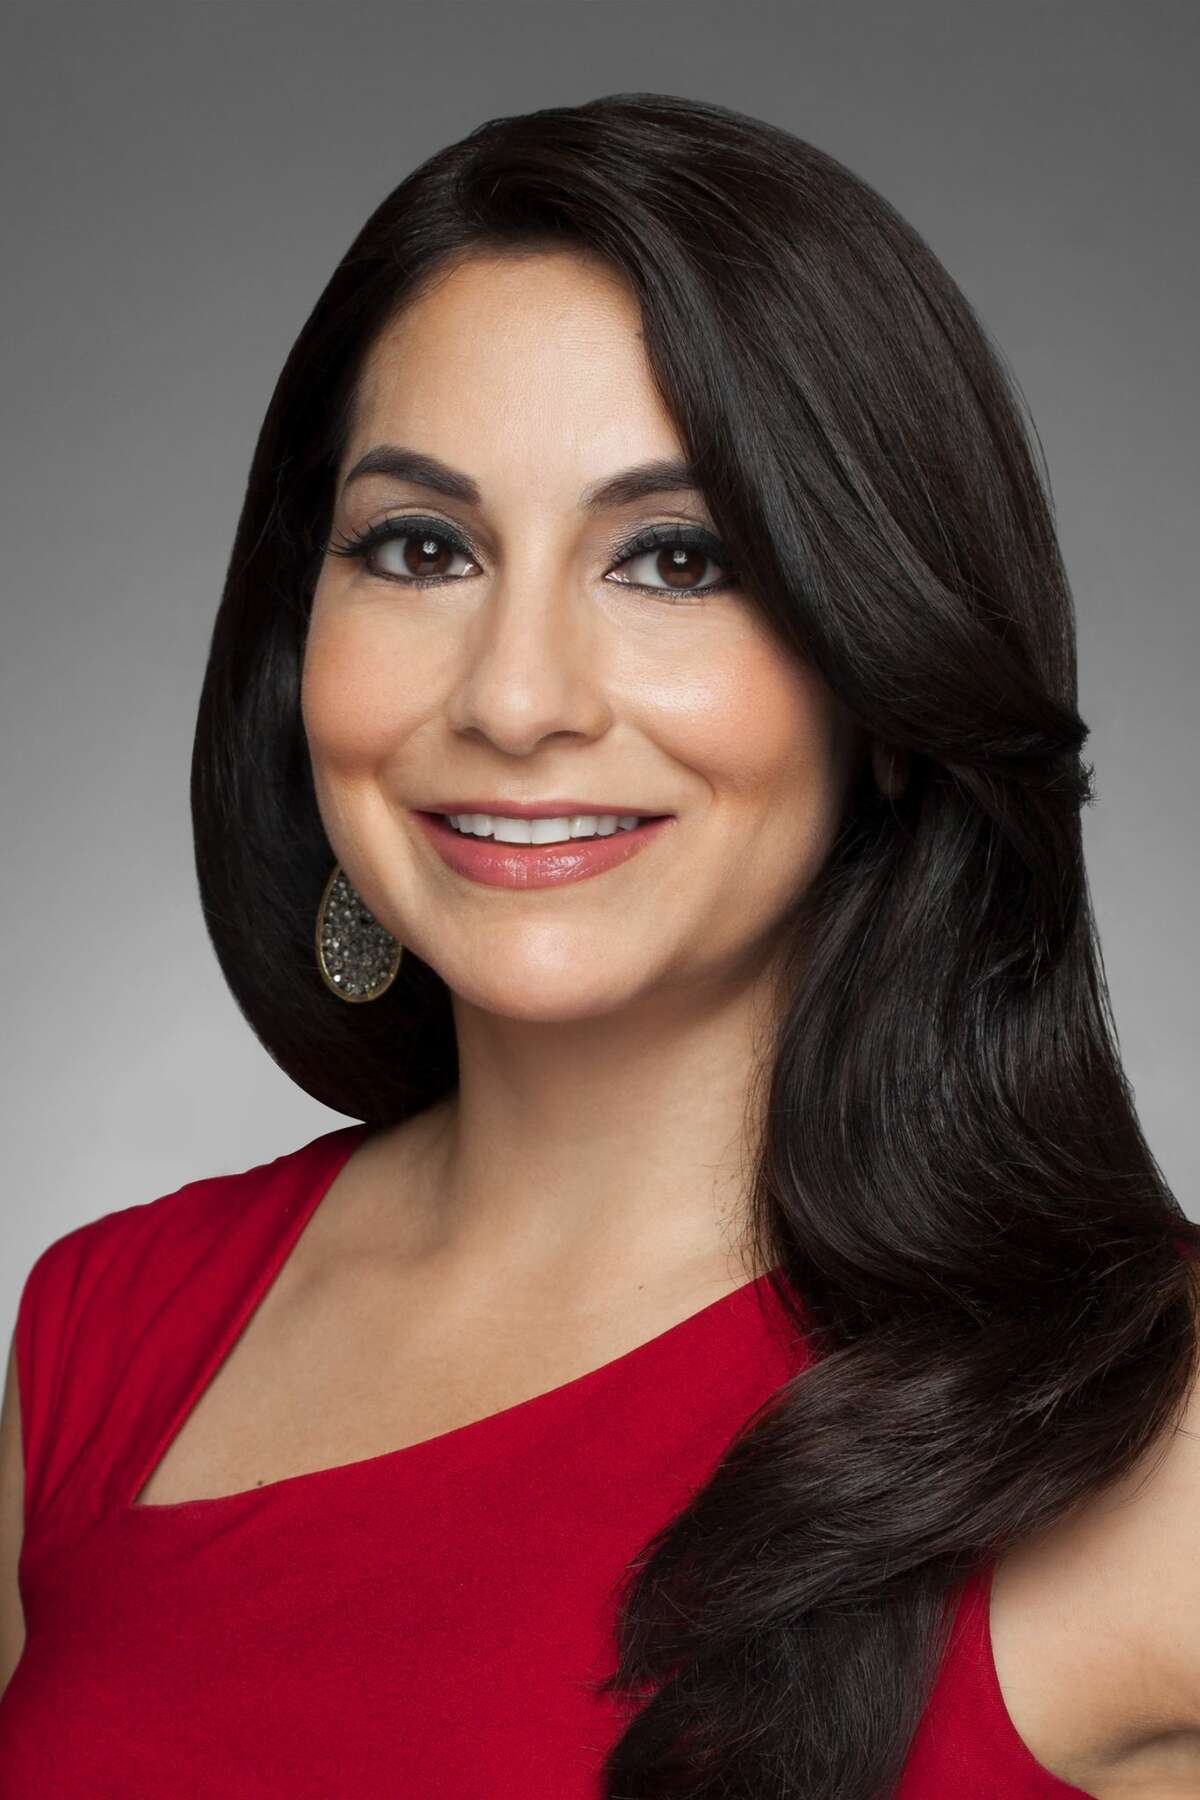 KSAT 12 has named Stephanie Serna as the new anchor of "Good Morning San Antonio" following the departure of Leslie Mouton.